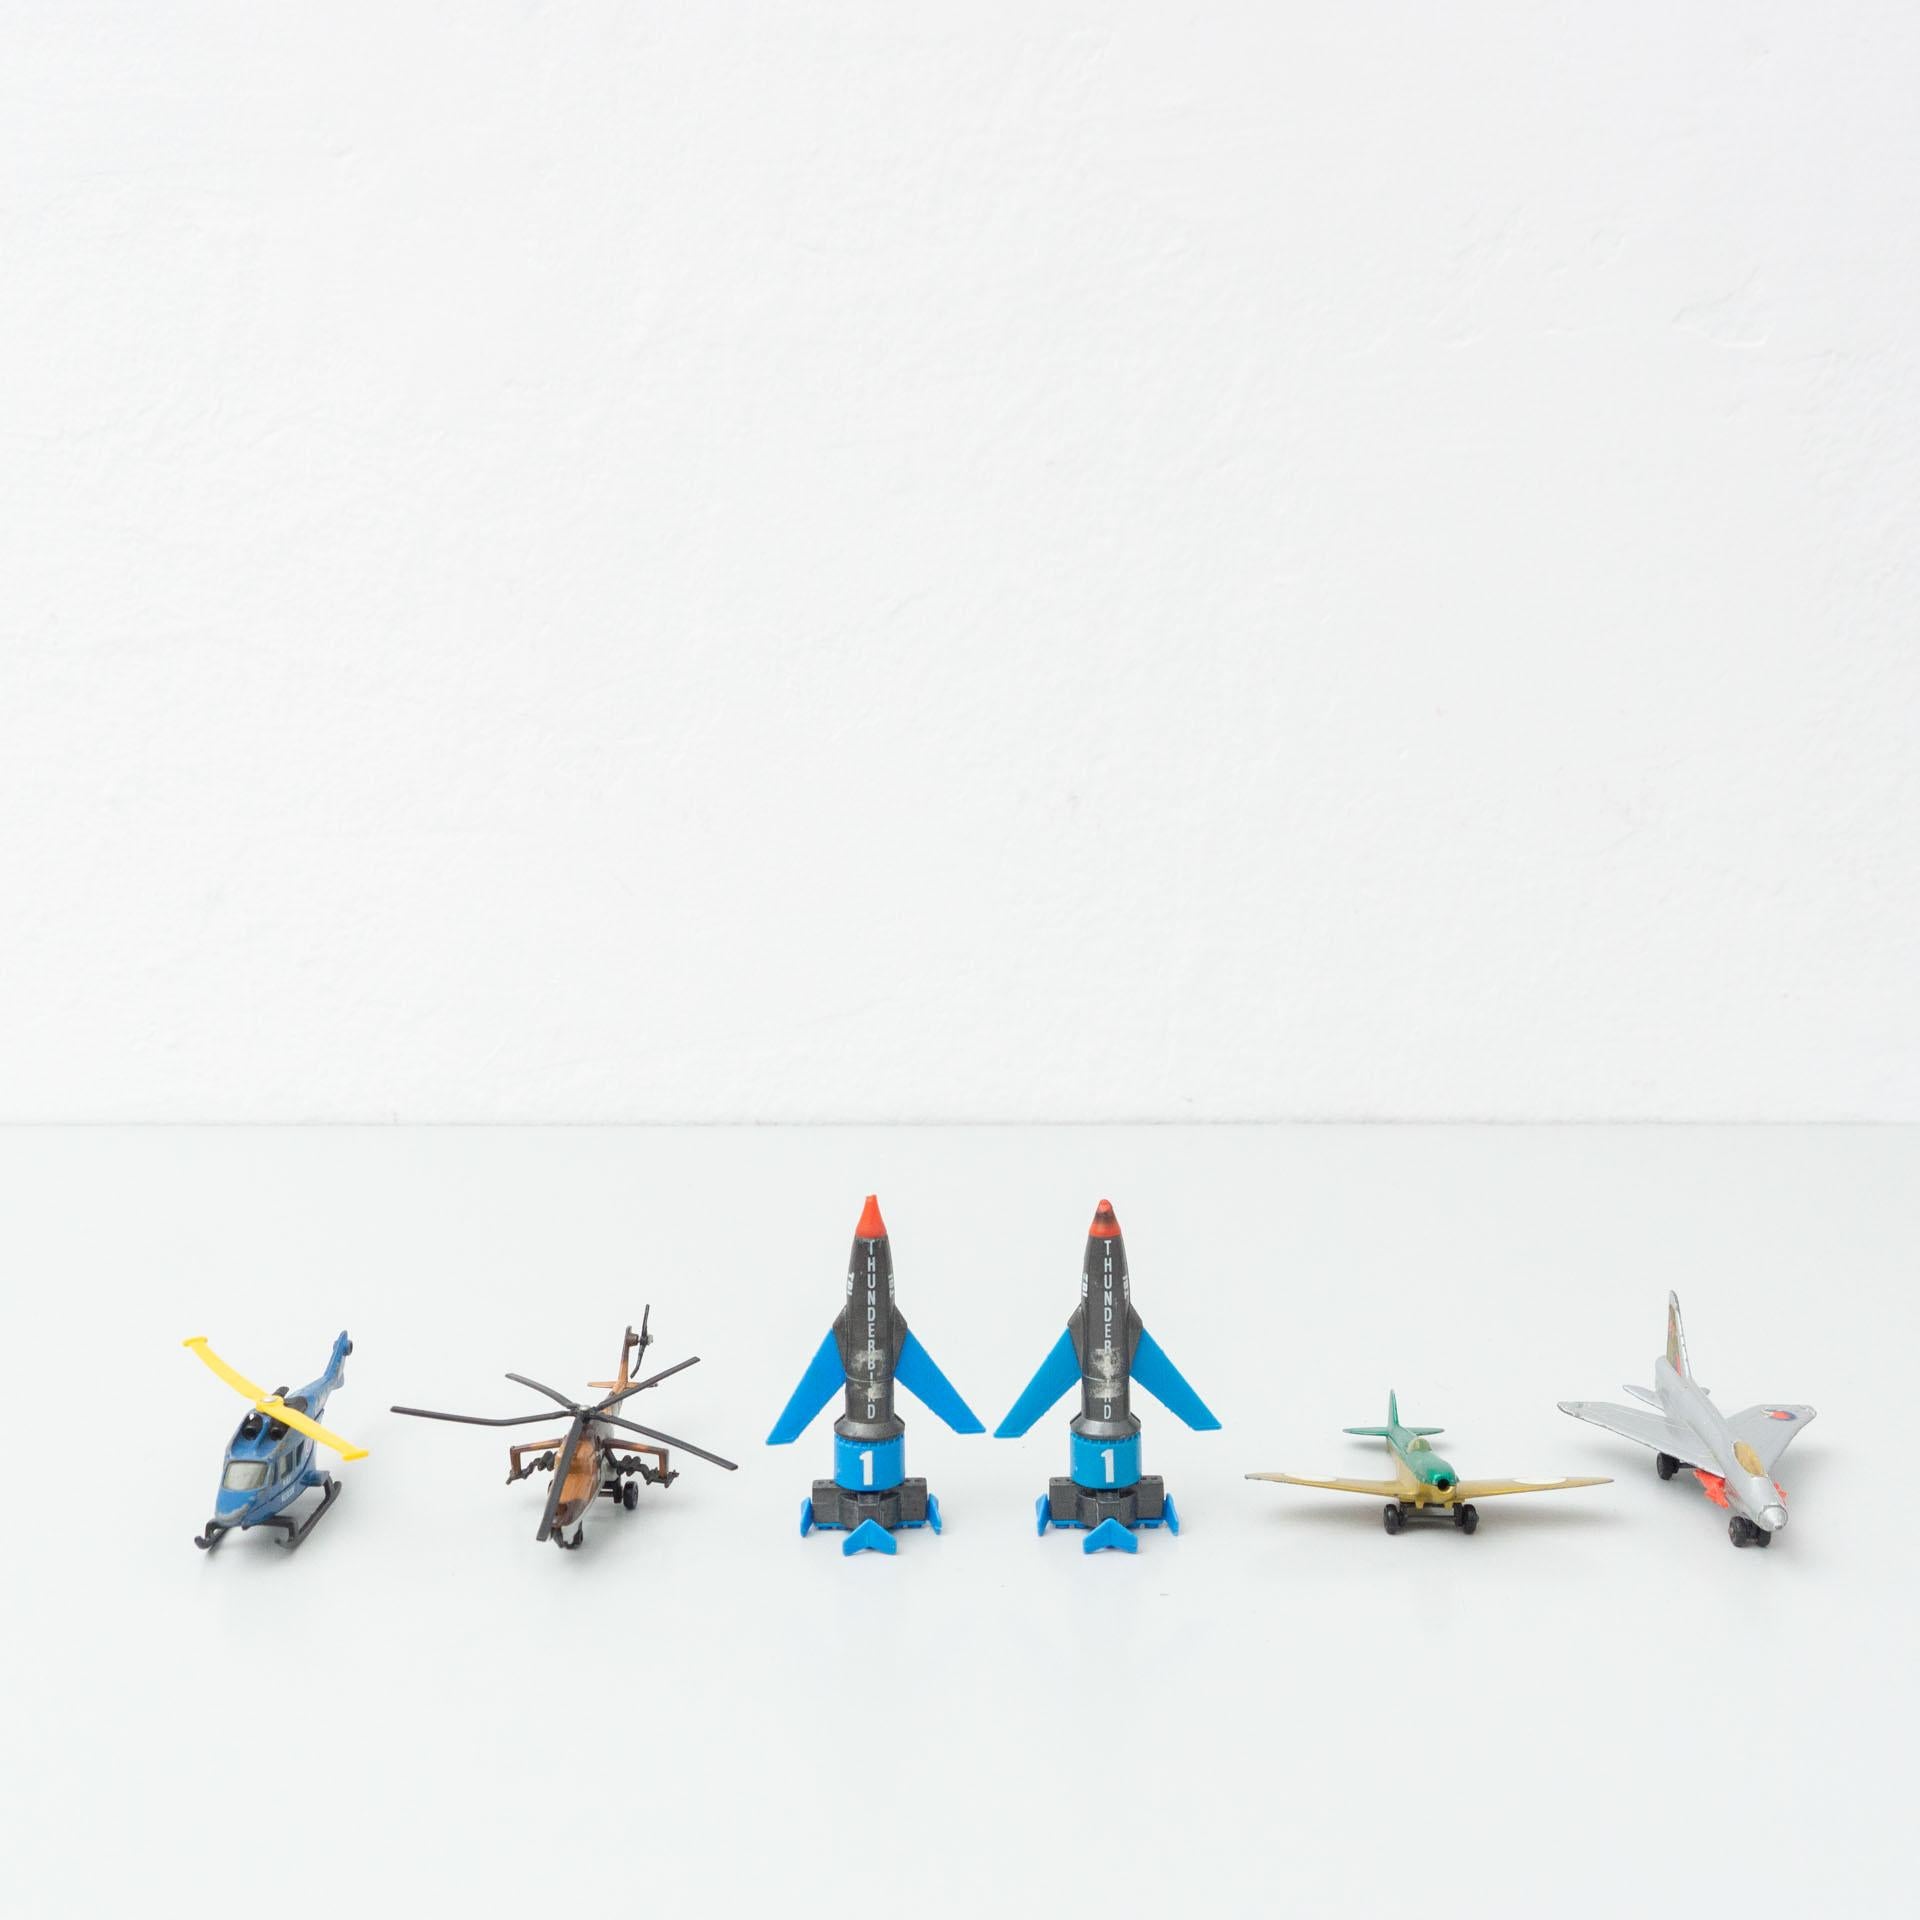 Set of six vintage aerials toys.
By Unknown manufacturer, circa 1960.

In original condition, with minor wear consistent with age and use, preserving a beautiful patina.

Materials:
Metal
Plastic

Dimensions (each one):
D 11 cm x W 7.5 cm